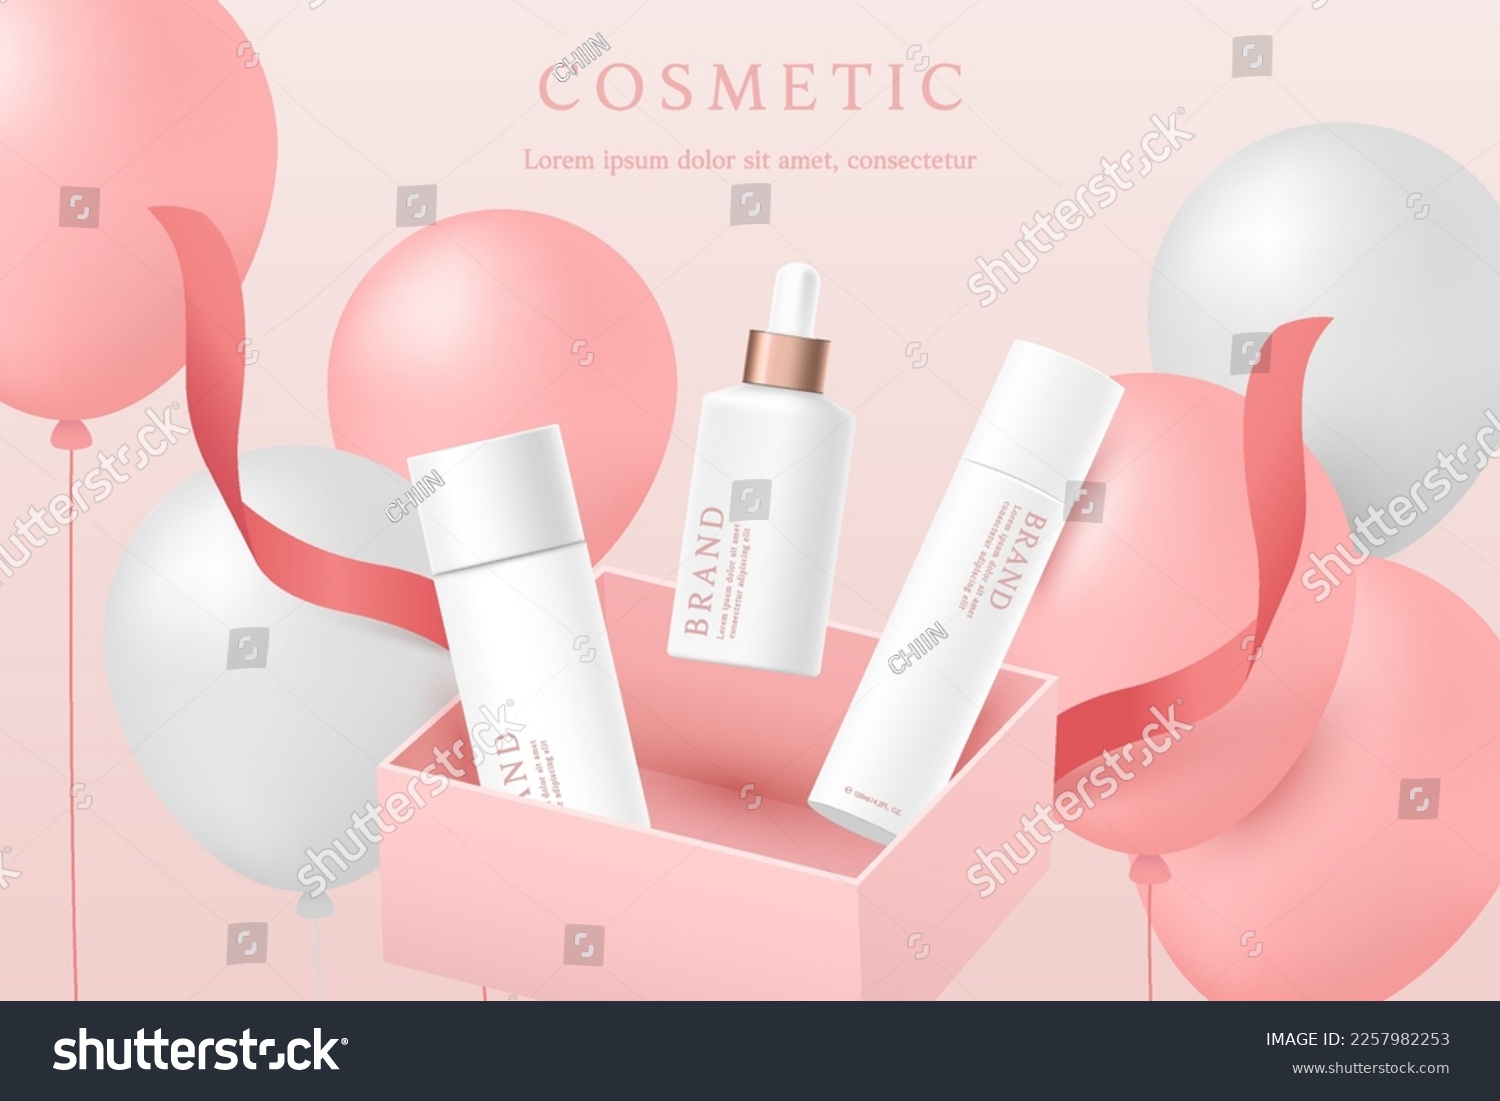 Cosmetics and skin care product ads template in pink gift gift box with ribbon and balloons. #2257982253